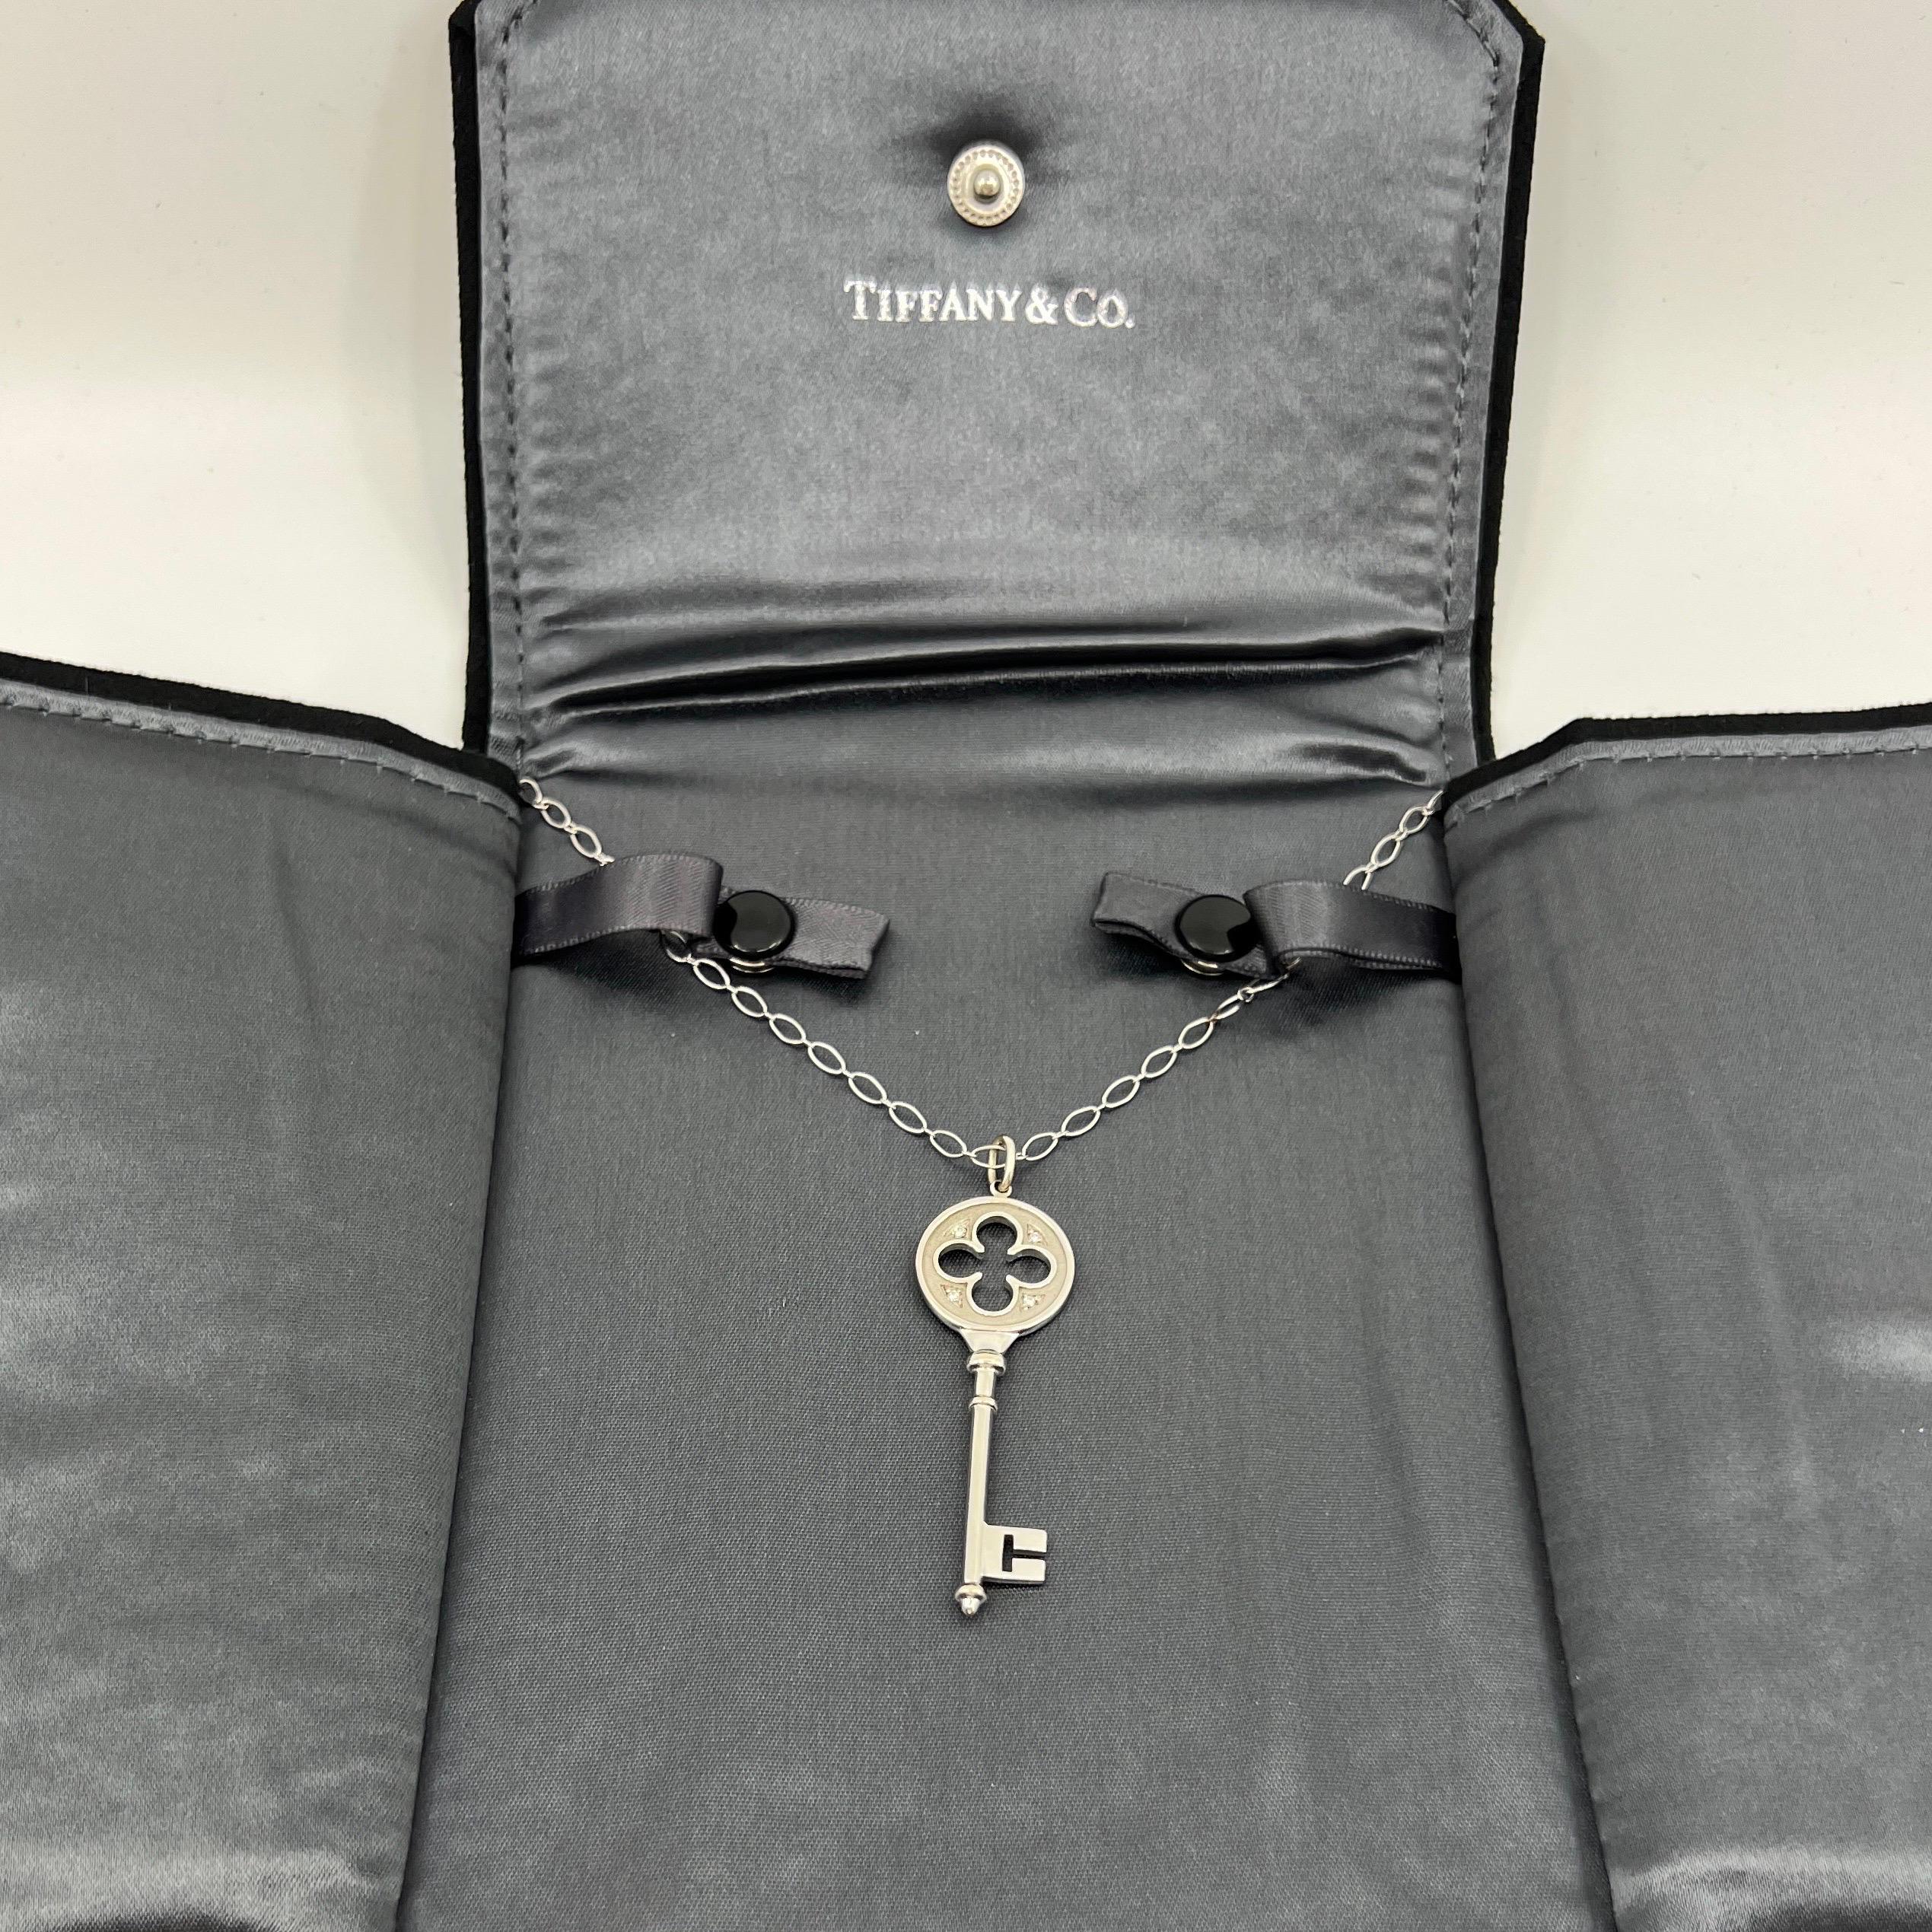 Tiffany & Co. 4 Leaf Clover Diamond 18k White Gold 2 Inch Key Pendant Necklace.

A beautiful and rare authentic Tiffany 4 leaf clover key pendant. Tiffany keys are 'radiant symbols of a bright future, representing brilliant beacons of optimism and